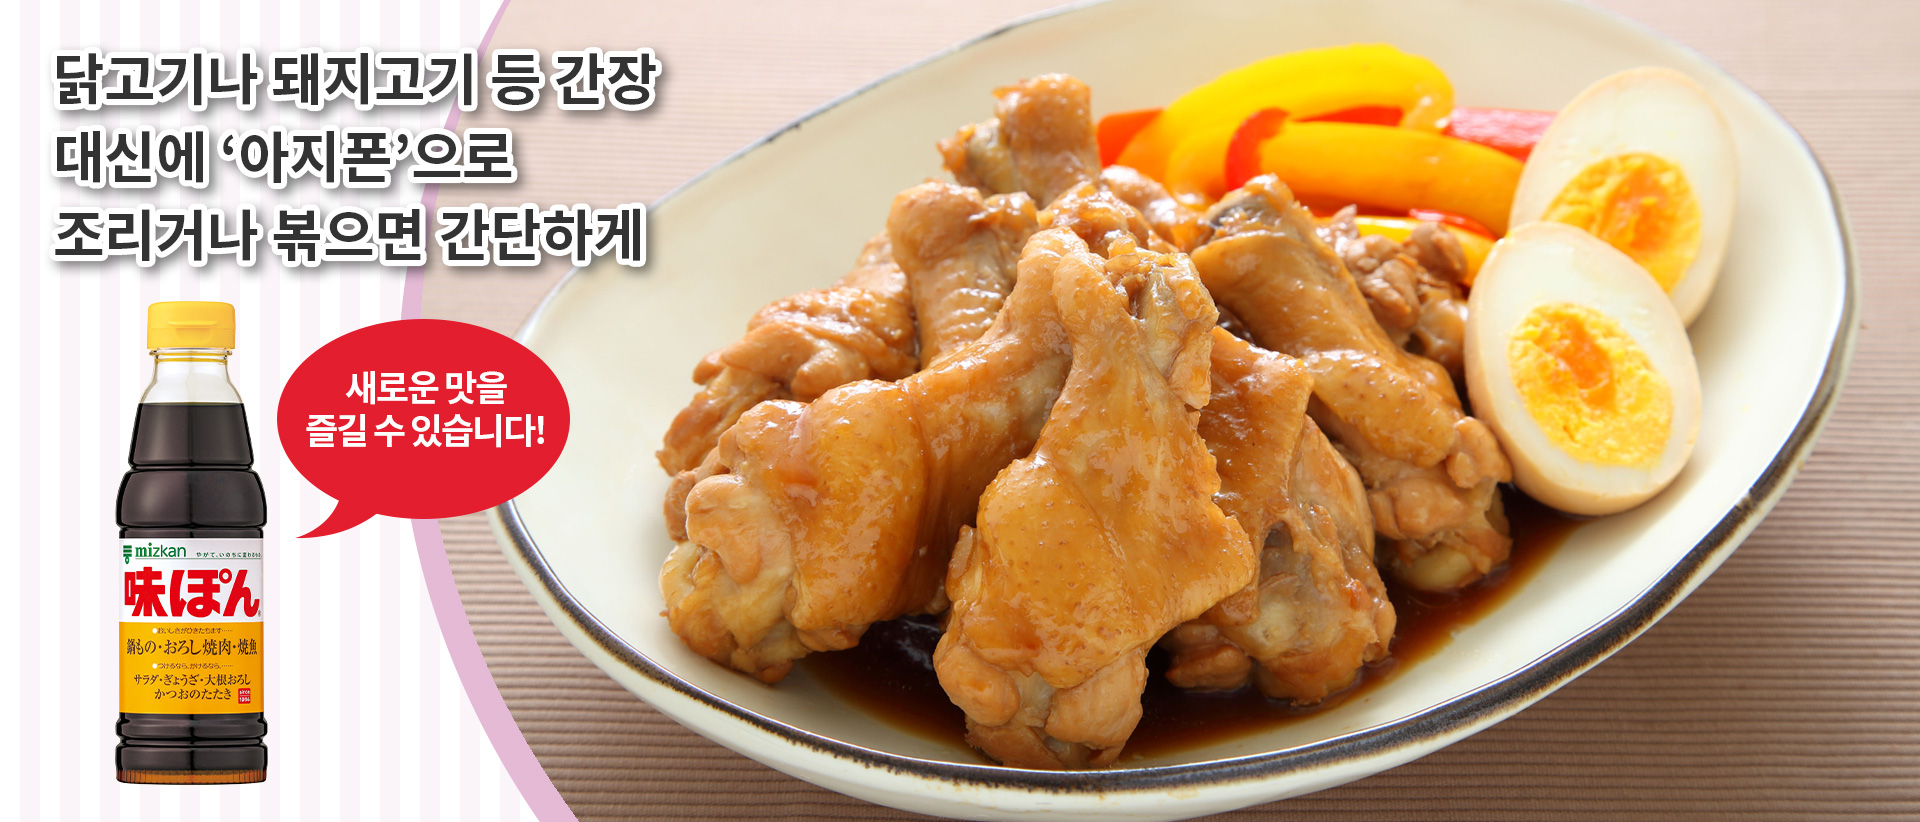 Boil or stir-fry chicken or pork with Ajipon instead of soy sauce! Try out this simpke way to enjoy new flavors!